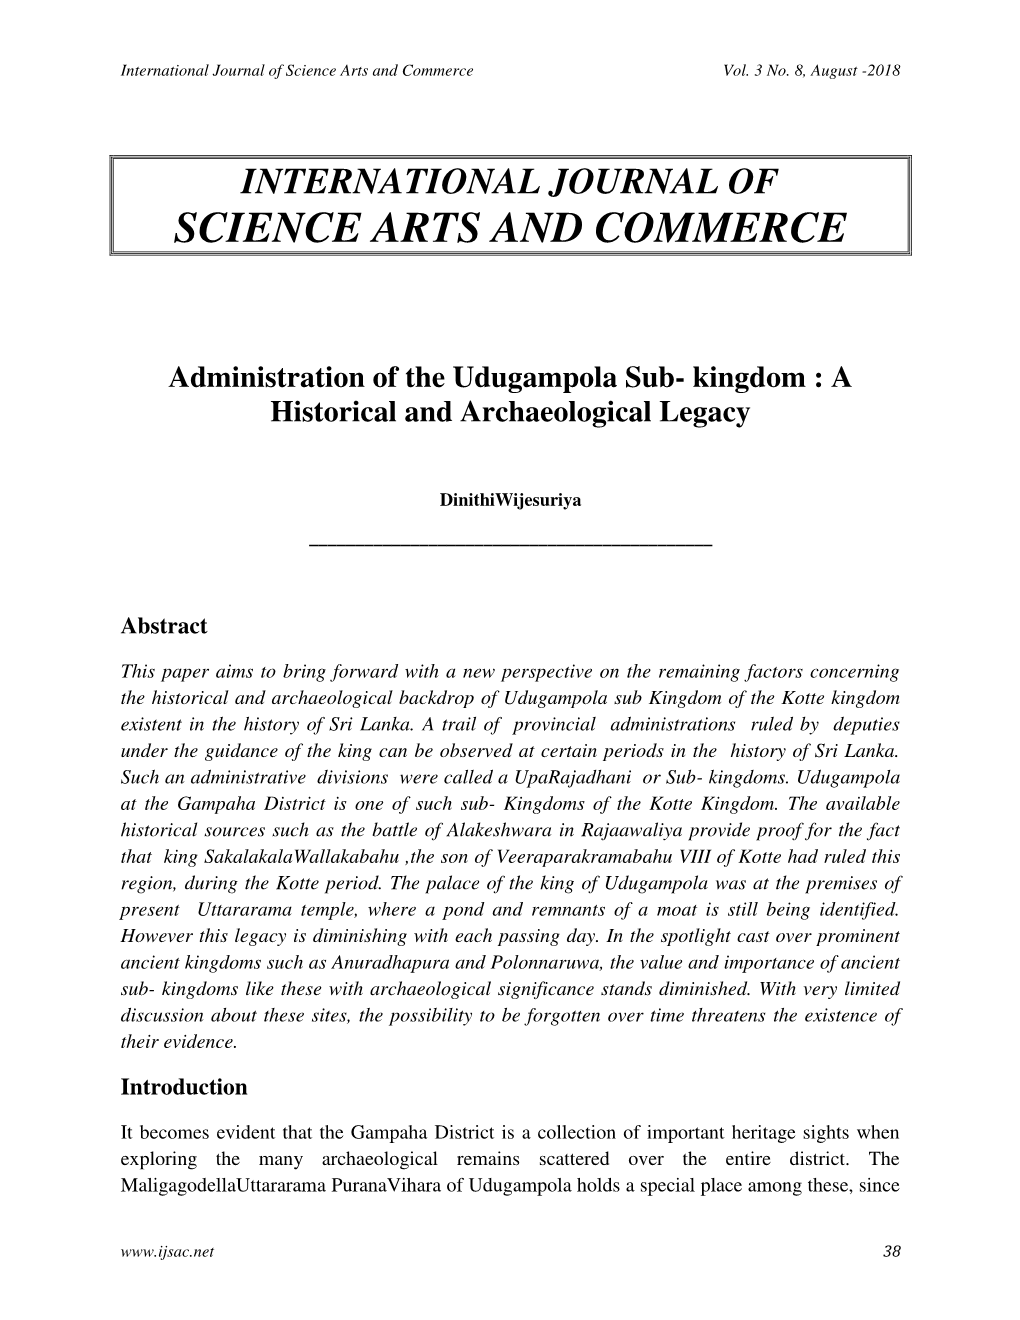 International Journal of Science Arts and Commerce Vol